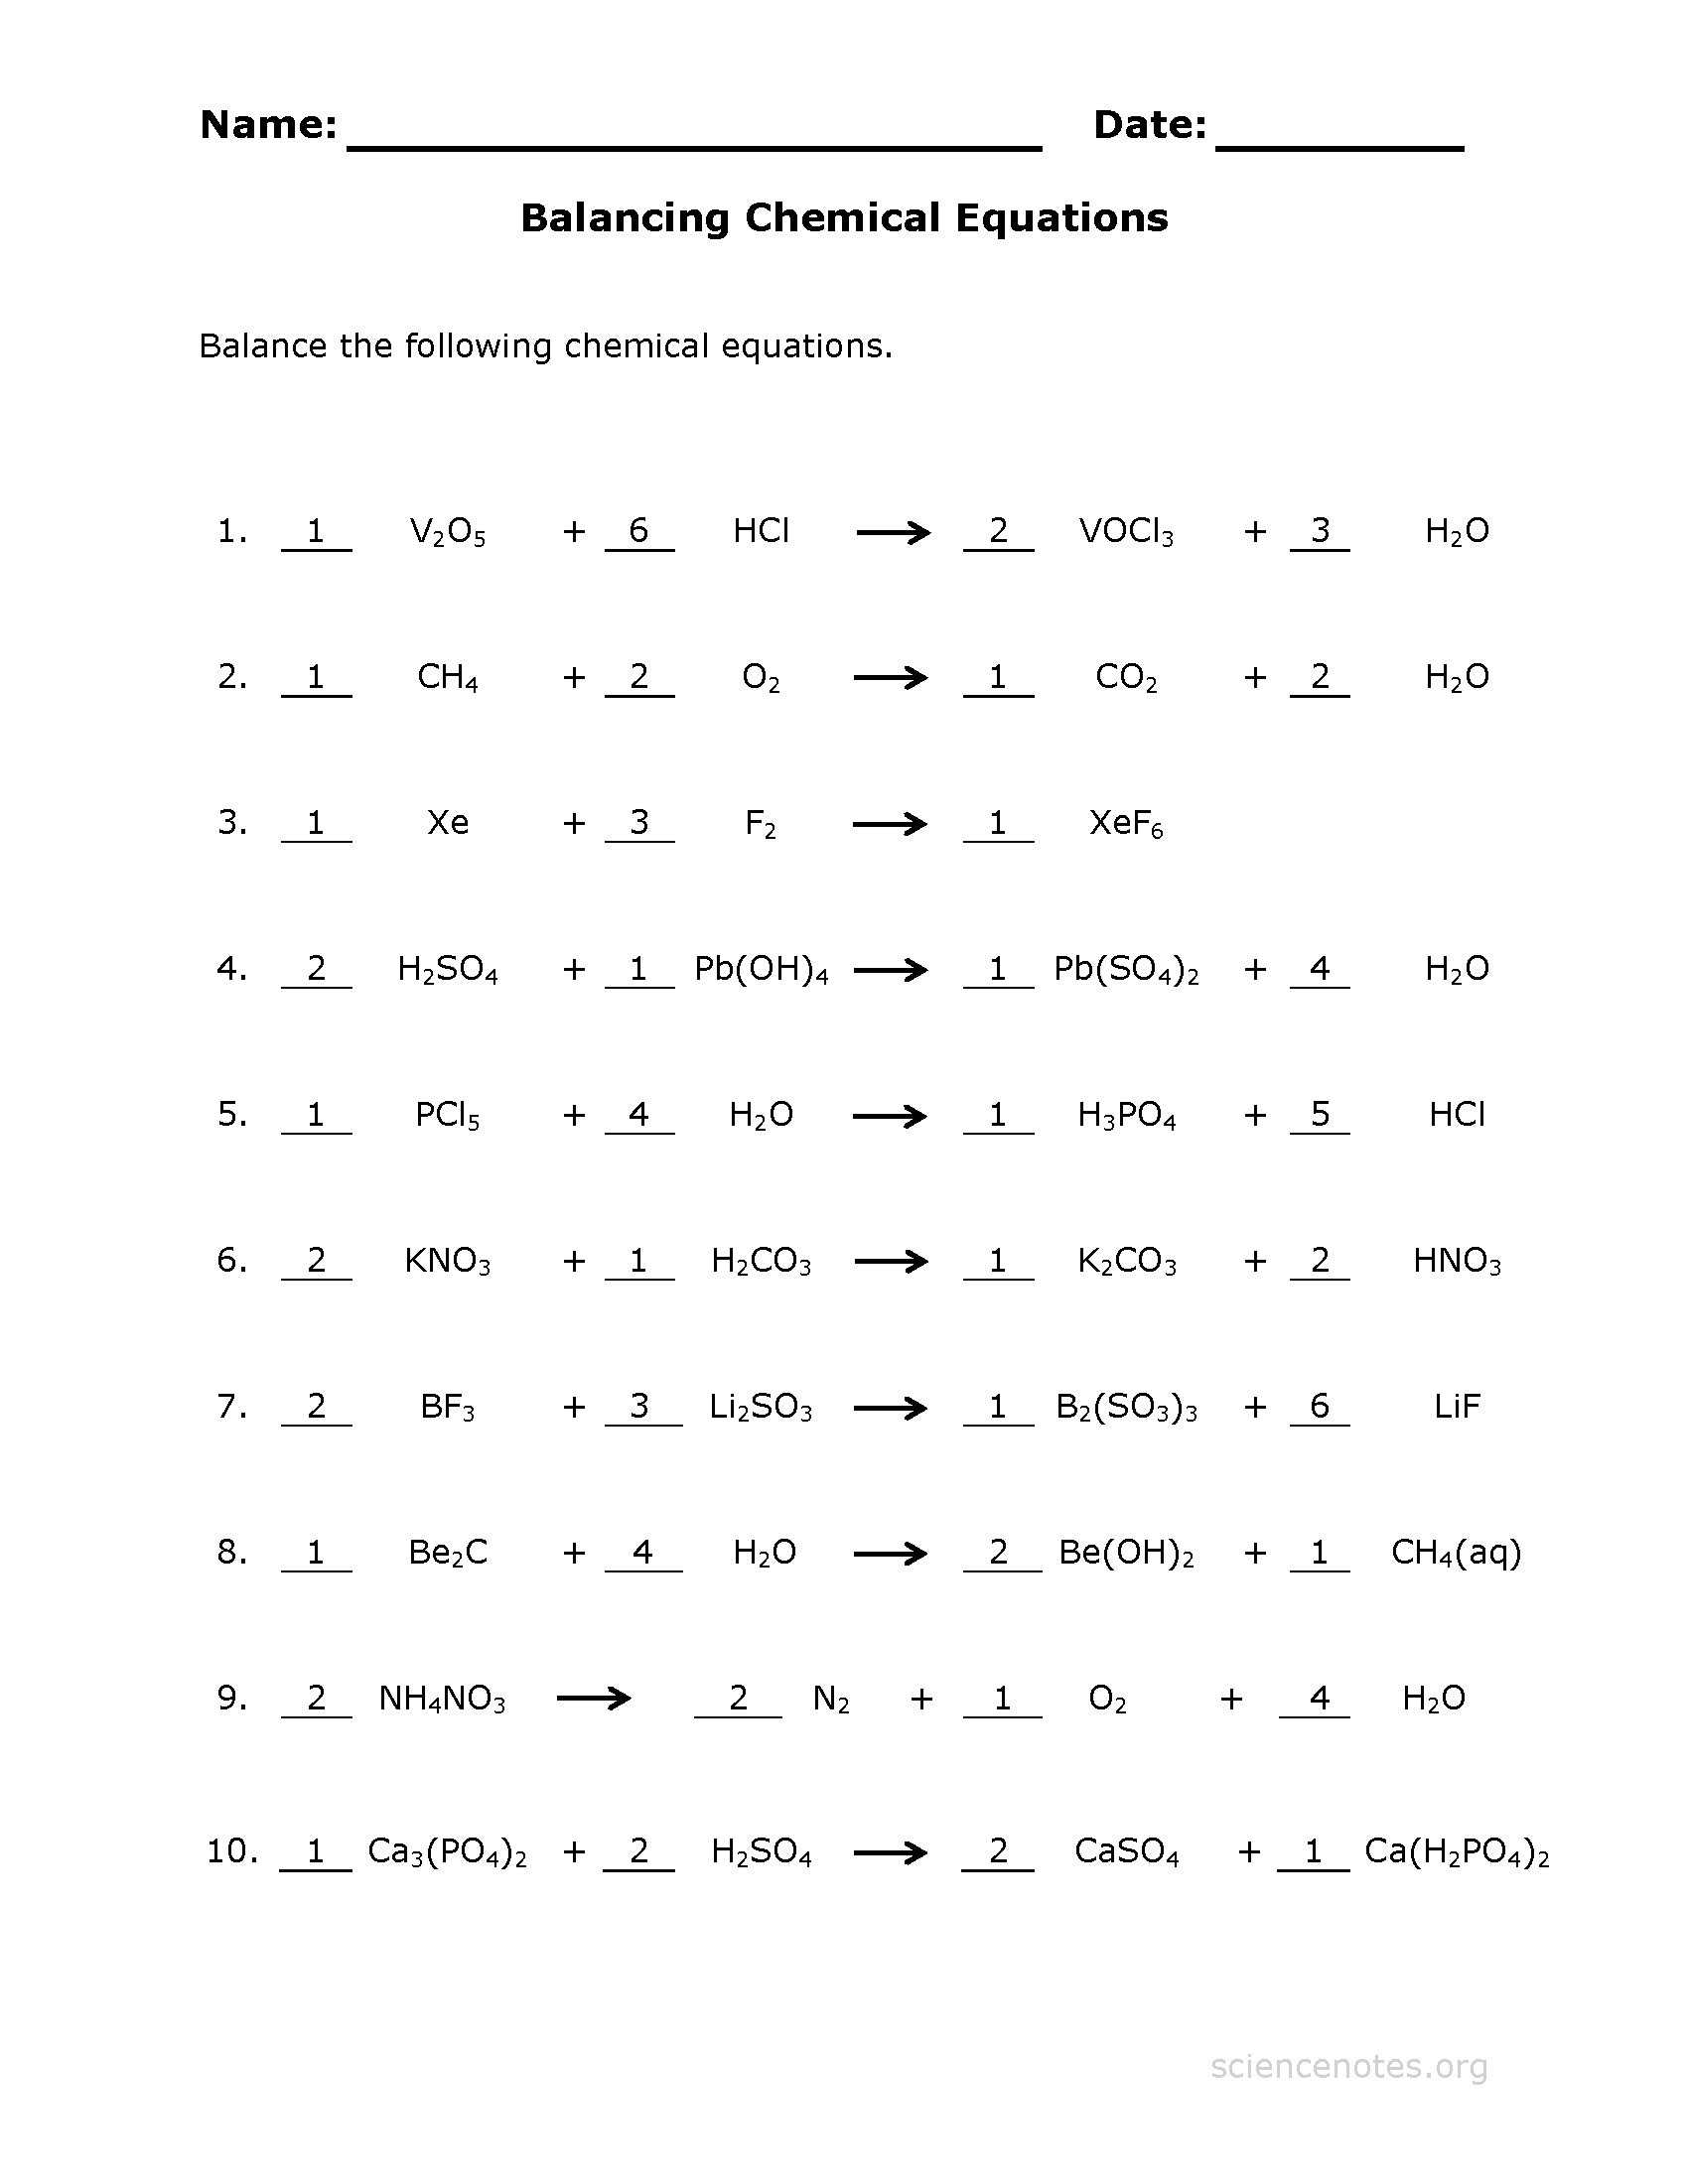 Photosynthesis and Cellular Respiration Review Worksheet Answer Key Along with Synthesis and Cellular Respiration Review Worksheet Answer Key